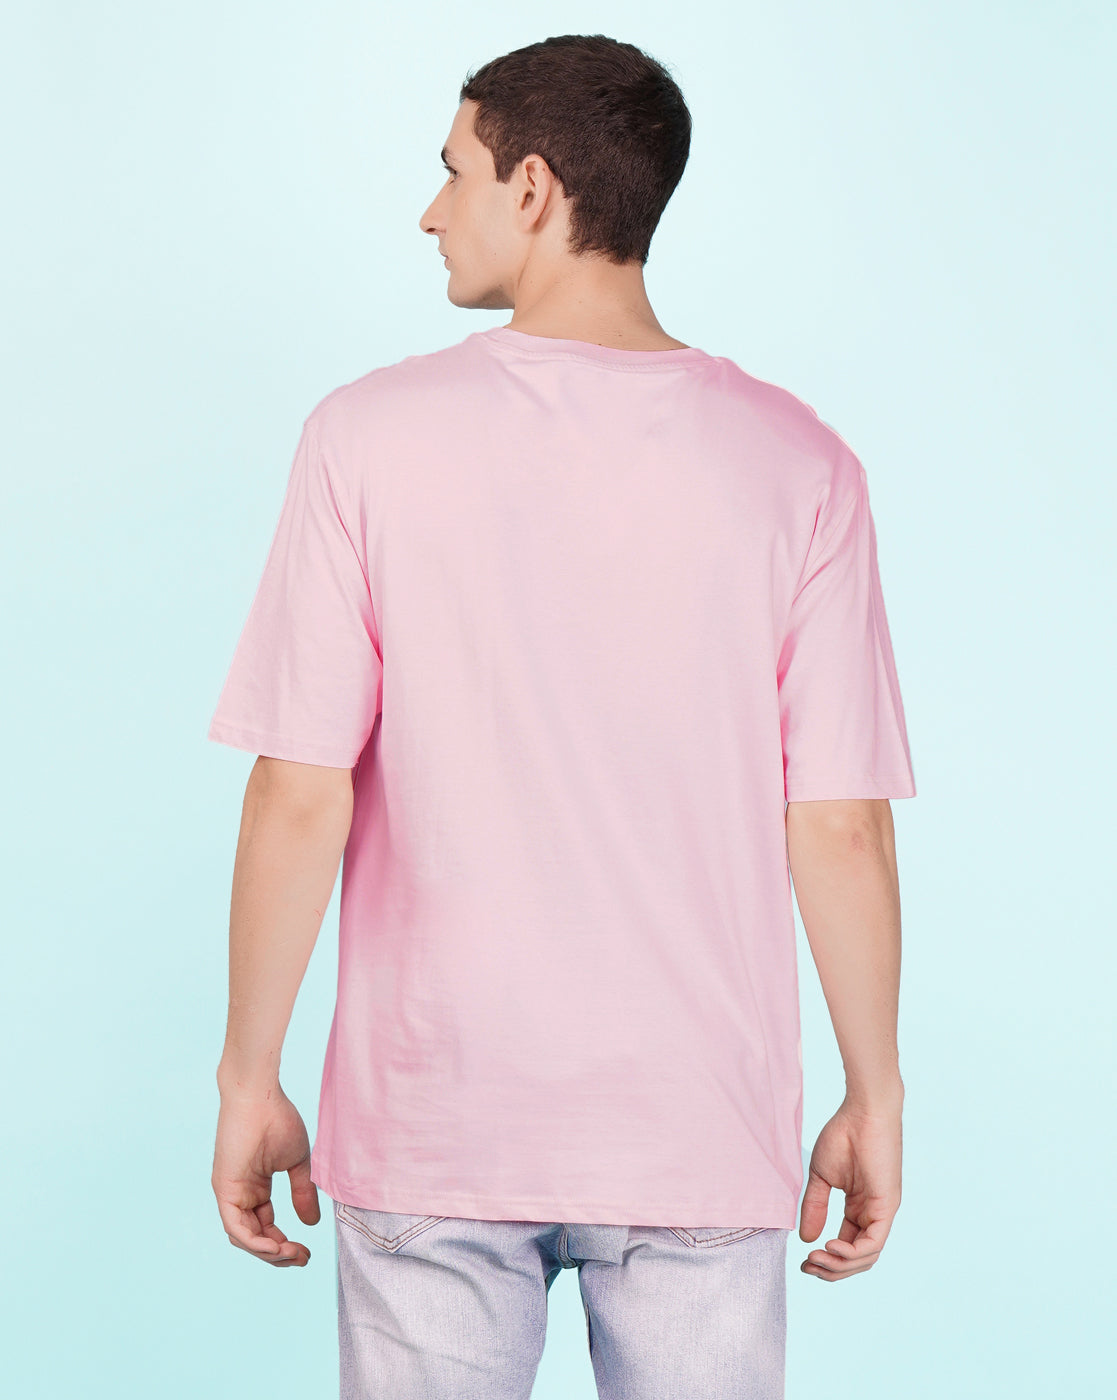 Nusyl Light Pink Game over Printed oversized t-shirt